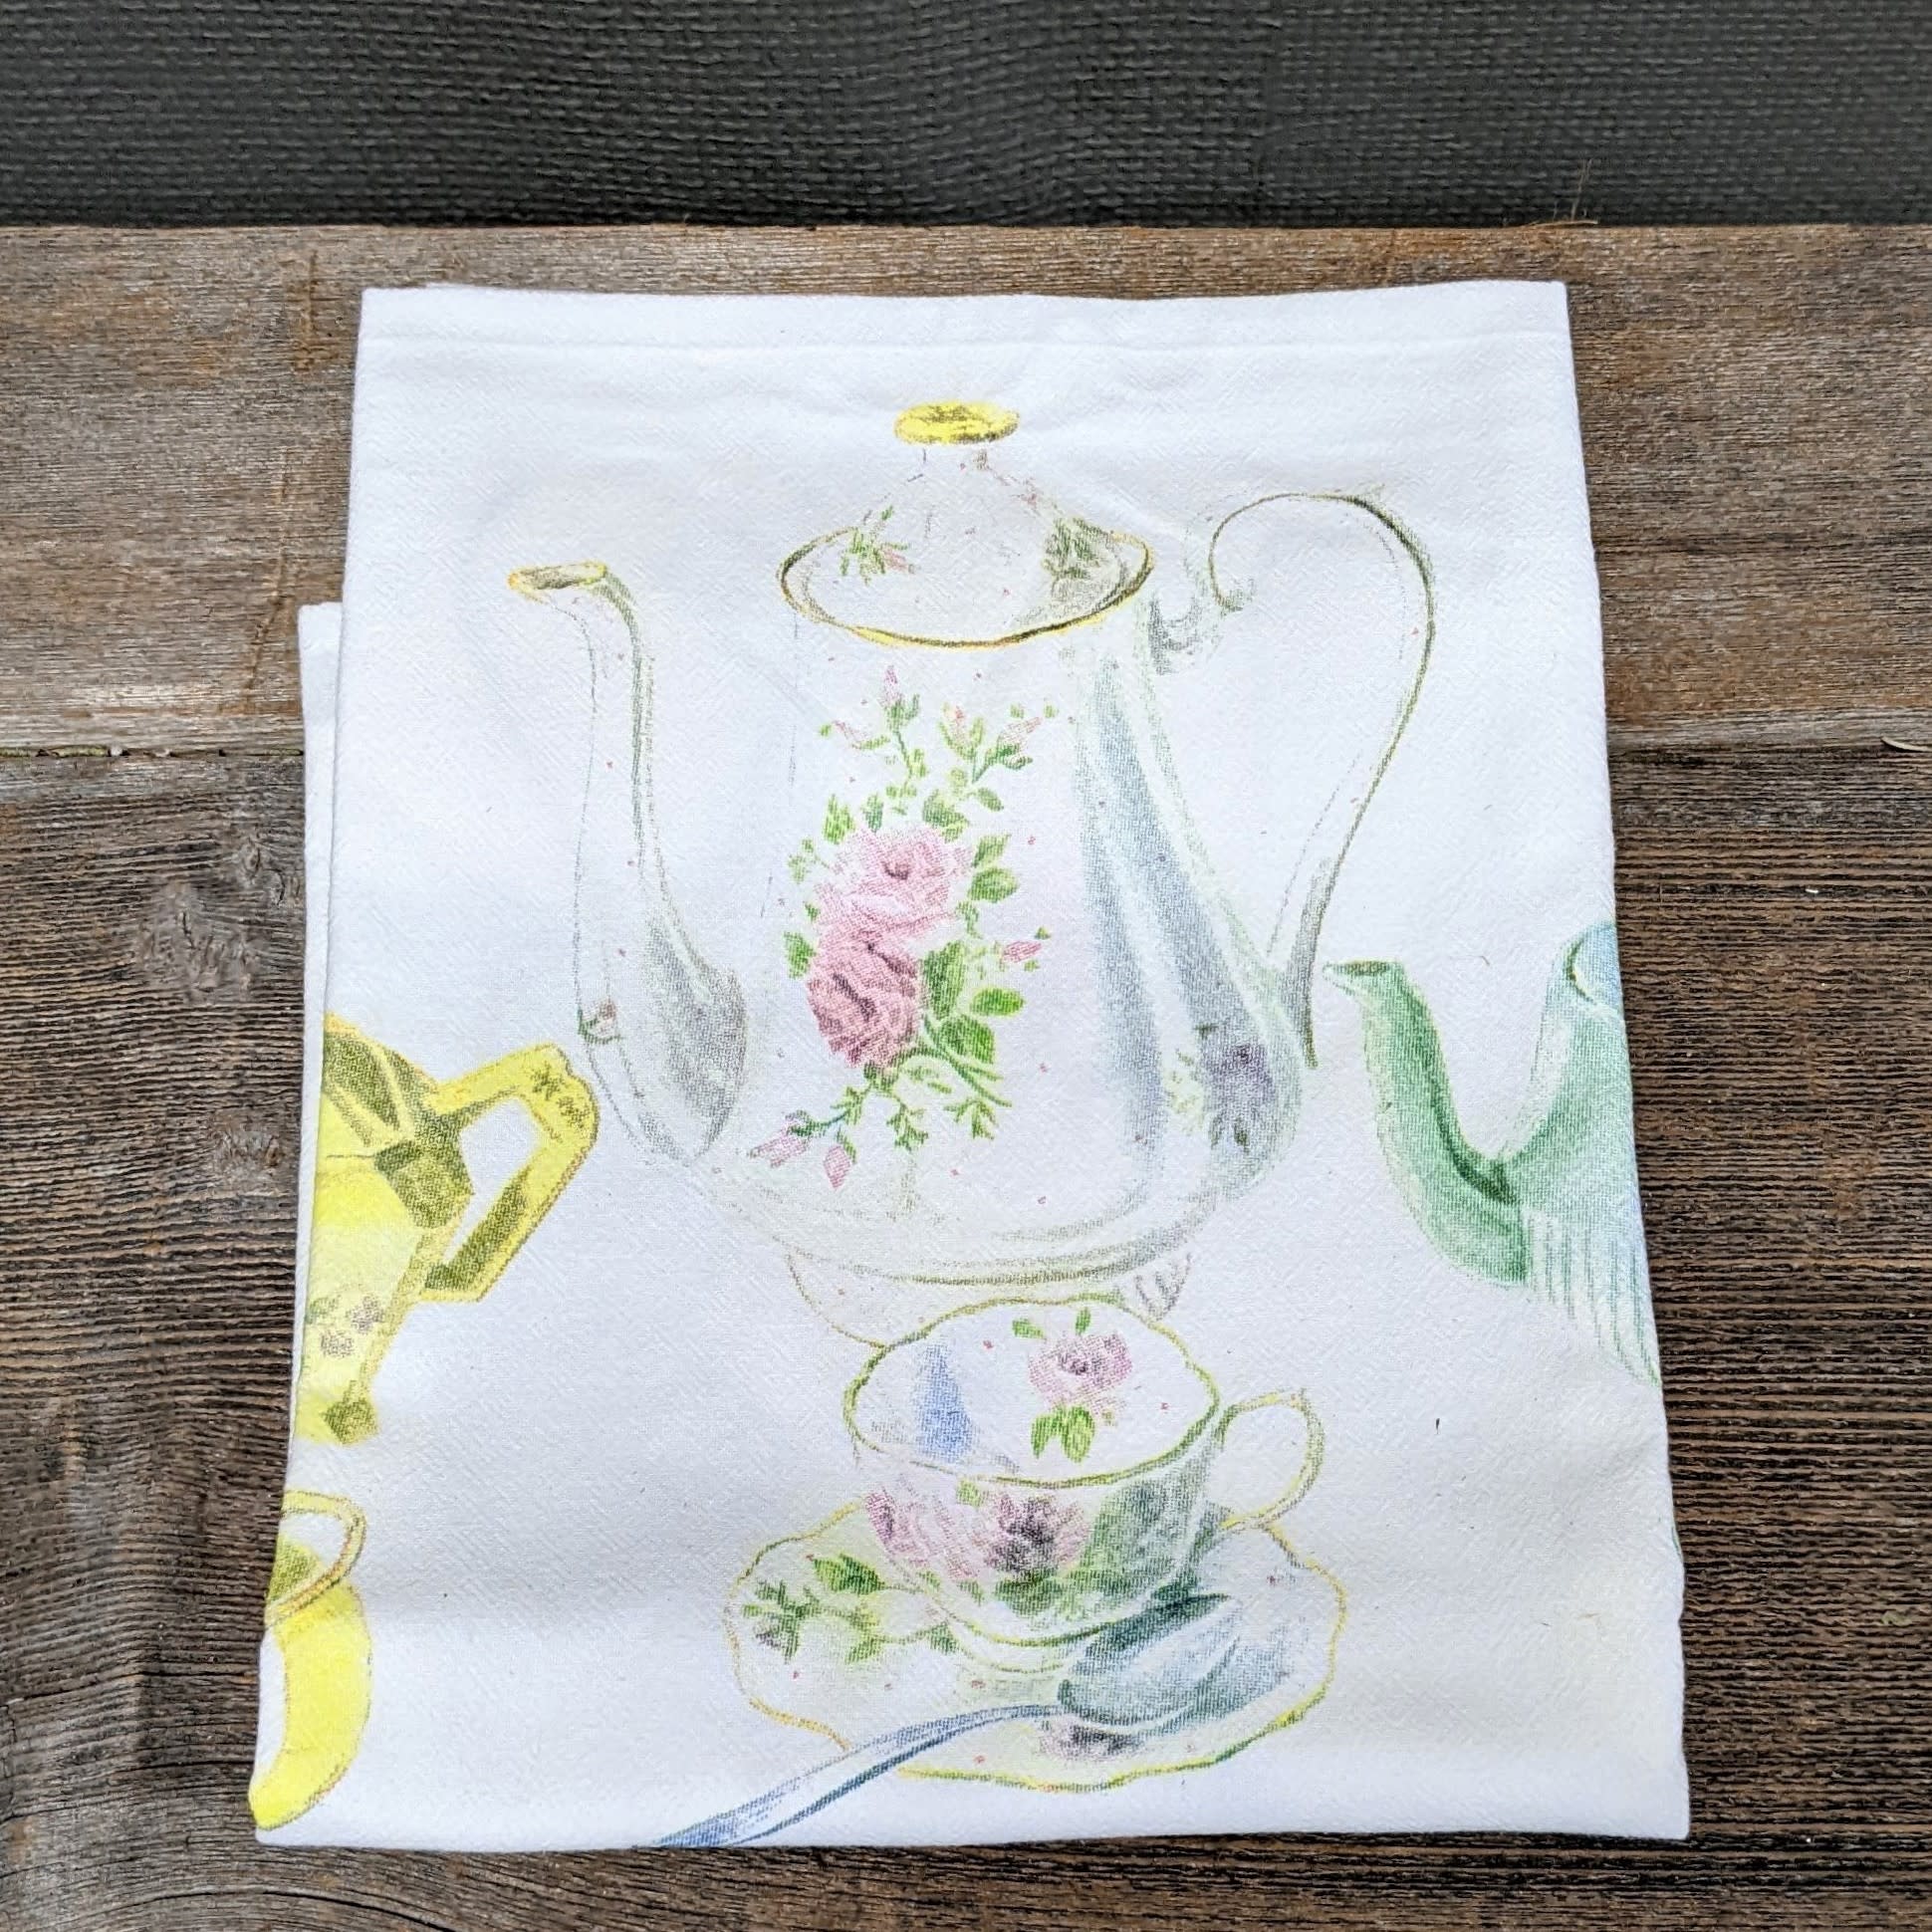 SALE: Amy's Almost Perfect Tea Time Flour Sack Towel - Local, Humboldt art on 100% cotton, oversized towel 24&quot;x36&quot;. Hot water machine wash and dryer safe. Fade resistant, can be bleached. Lint free. Made in the USA